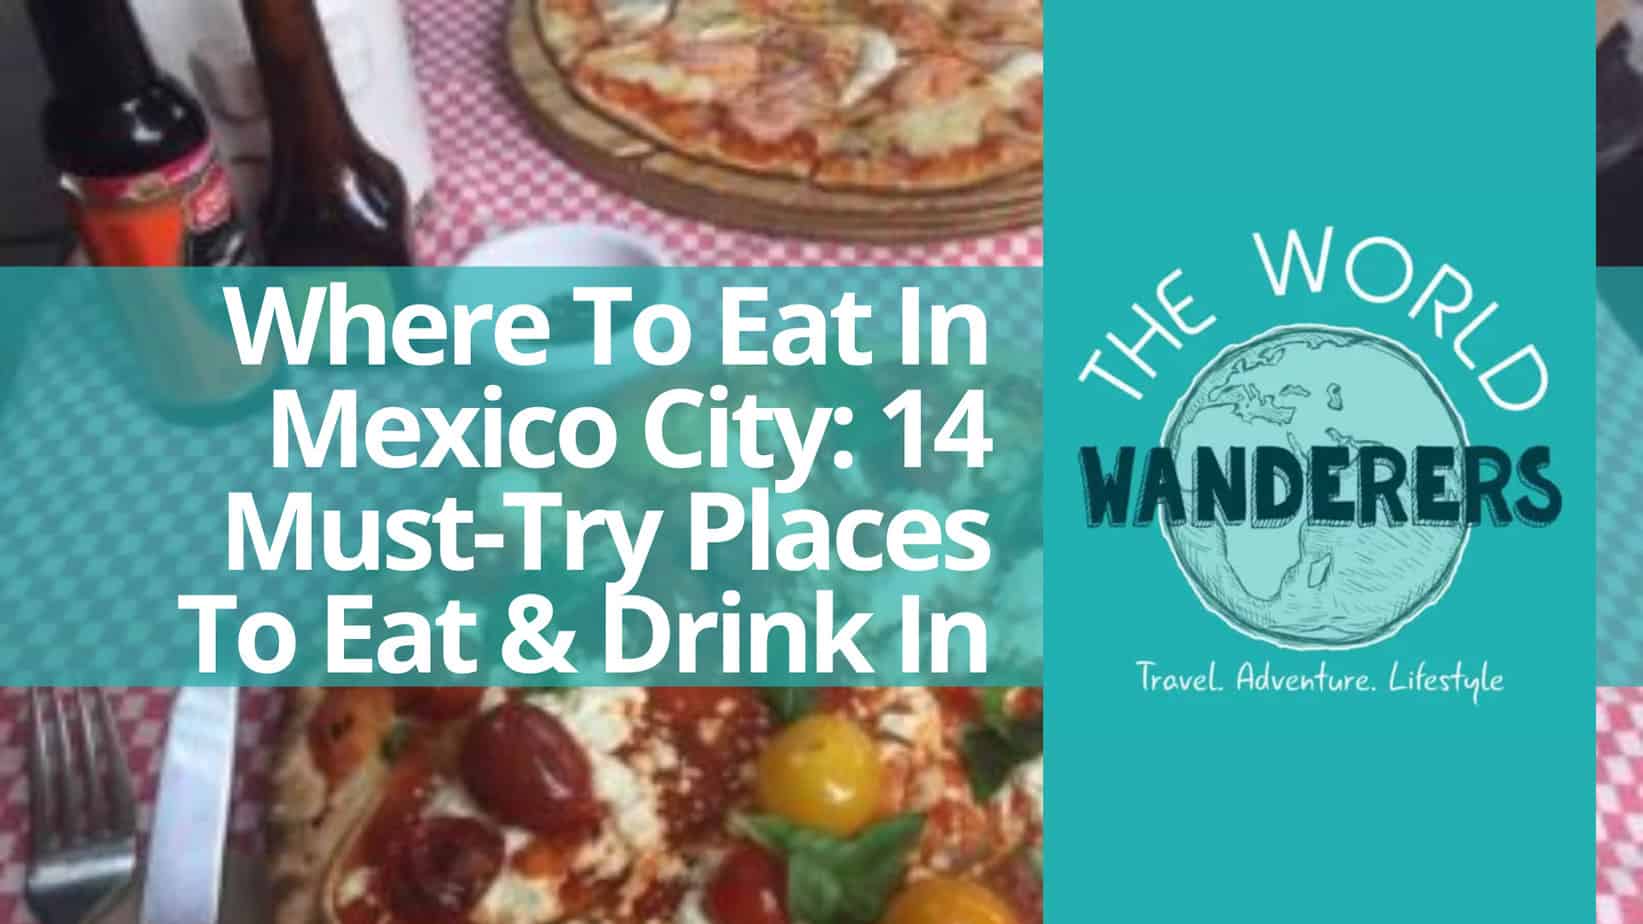 Where To Eat In Mexico City 14 Must-Try Places To Eat & Drink In